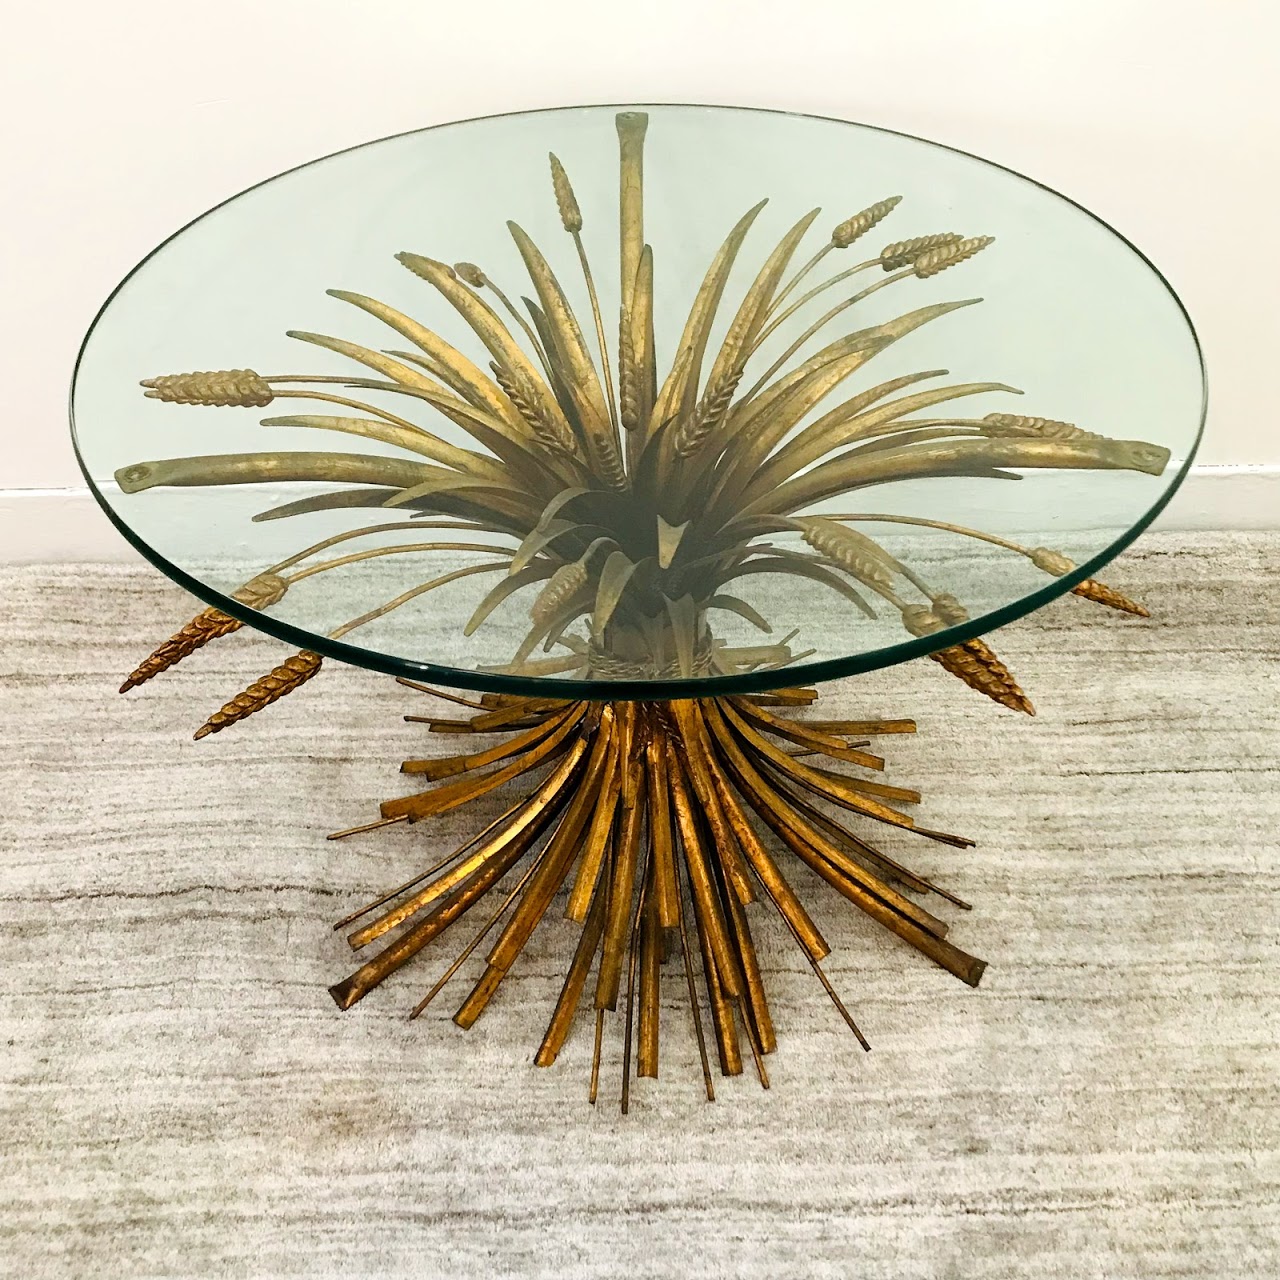 Maison Baguès Style 1950s Sheaf of Wheat Cocktail Table